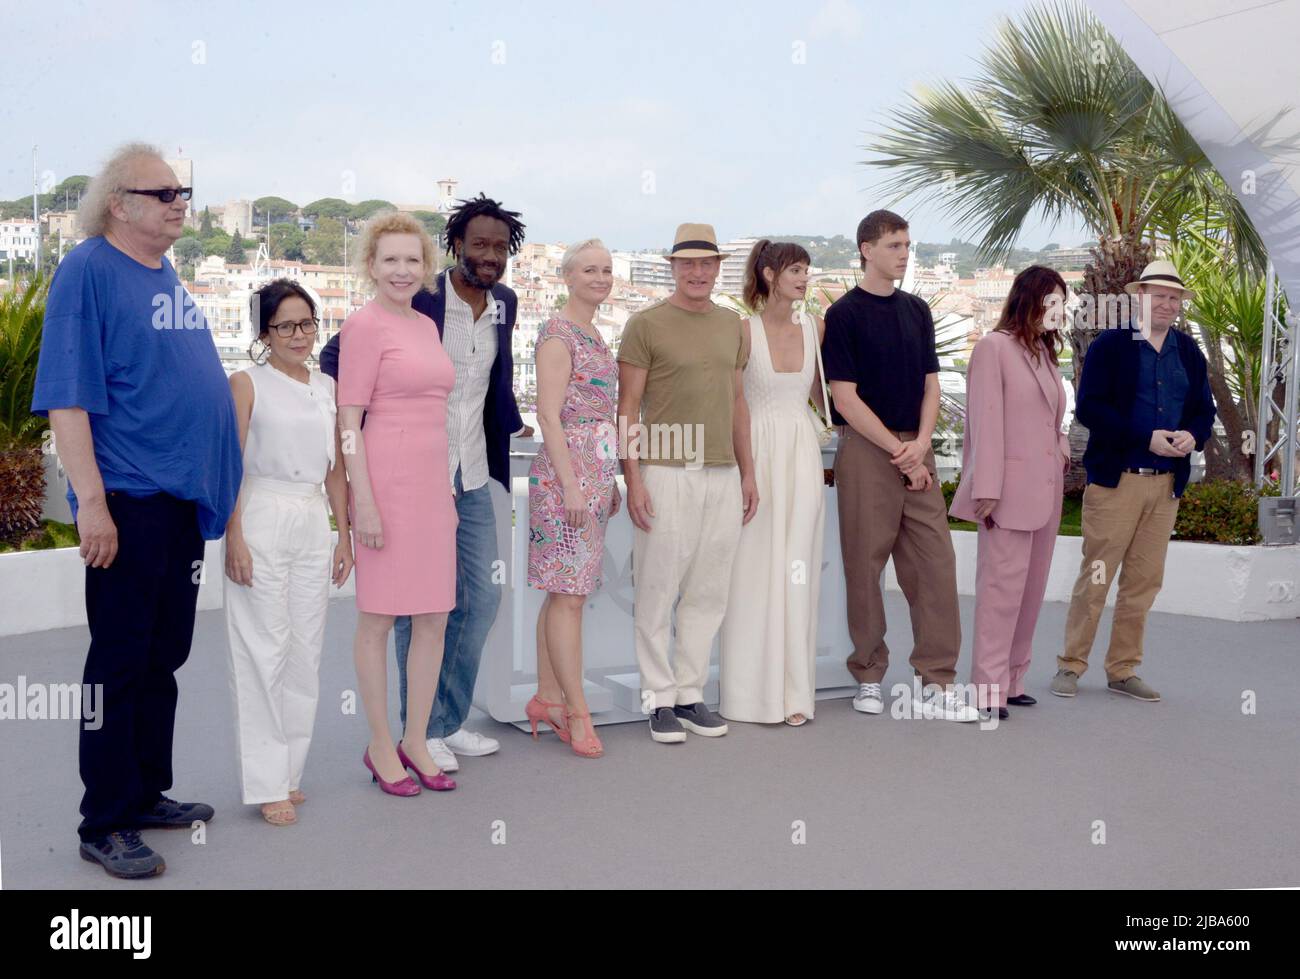 May 22, 2022, CANNES, France: CANNES, FRANCE - MAY 22: (L to R) Producer Erik Hemmendorff, Zlatko Buric, Dolly De Leon, Sunnyi Melles, Jean-Christophe Folly, Vicki Berlin, Woody Harrelson, Director Ruben Ostlund, Charlbi Dean, Harris Dickinson, Iris Berben, Henrik Dorsin an Producer Philippe Bober attend the photocall for ''Triangle Of Sadness'' during the 75th annual Cannes film festival at Palais des Festivals on May 22, 2022 in Cannes, France. (Credit Image: © Frederick Injimbert/ZUMA Press Wire) Stock Photo